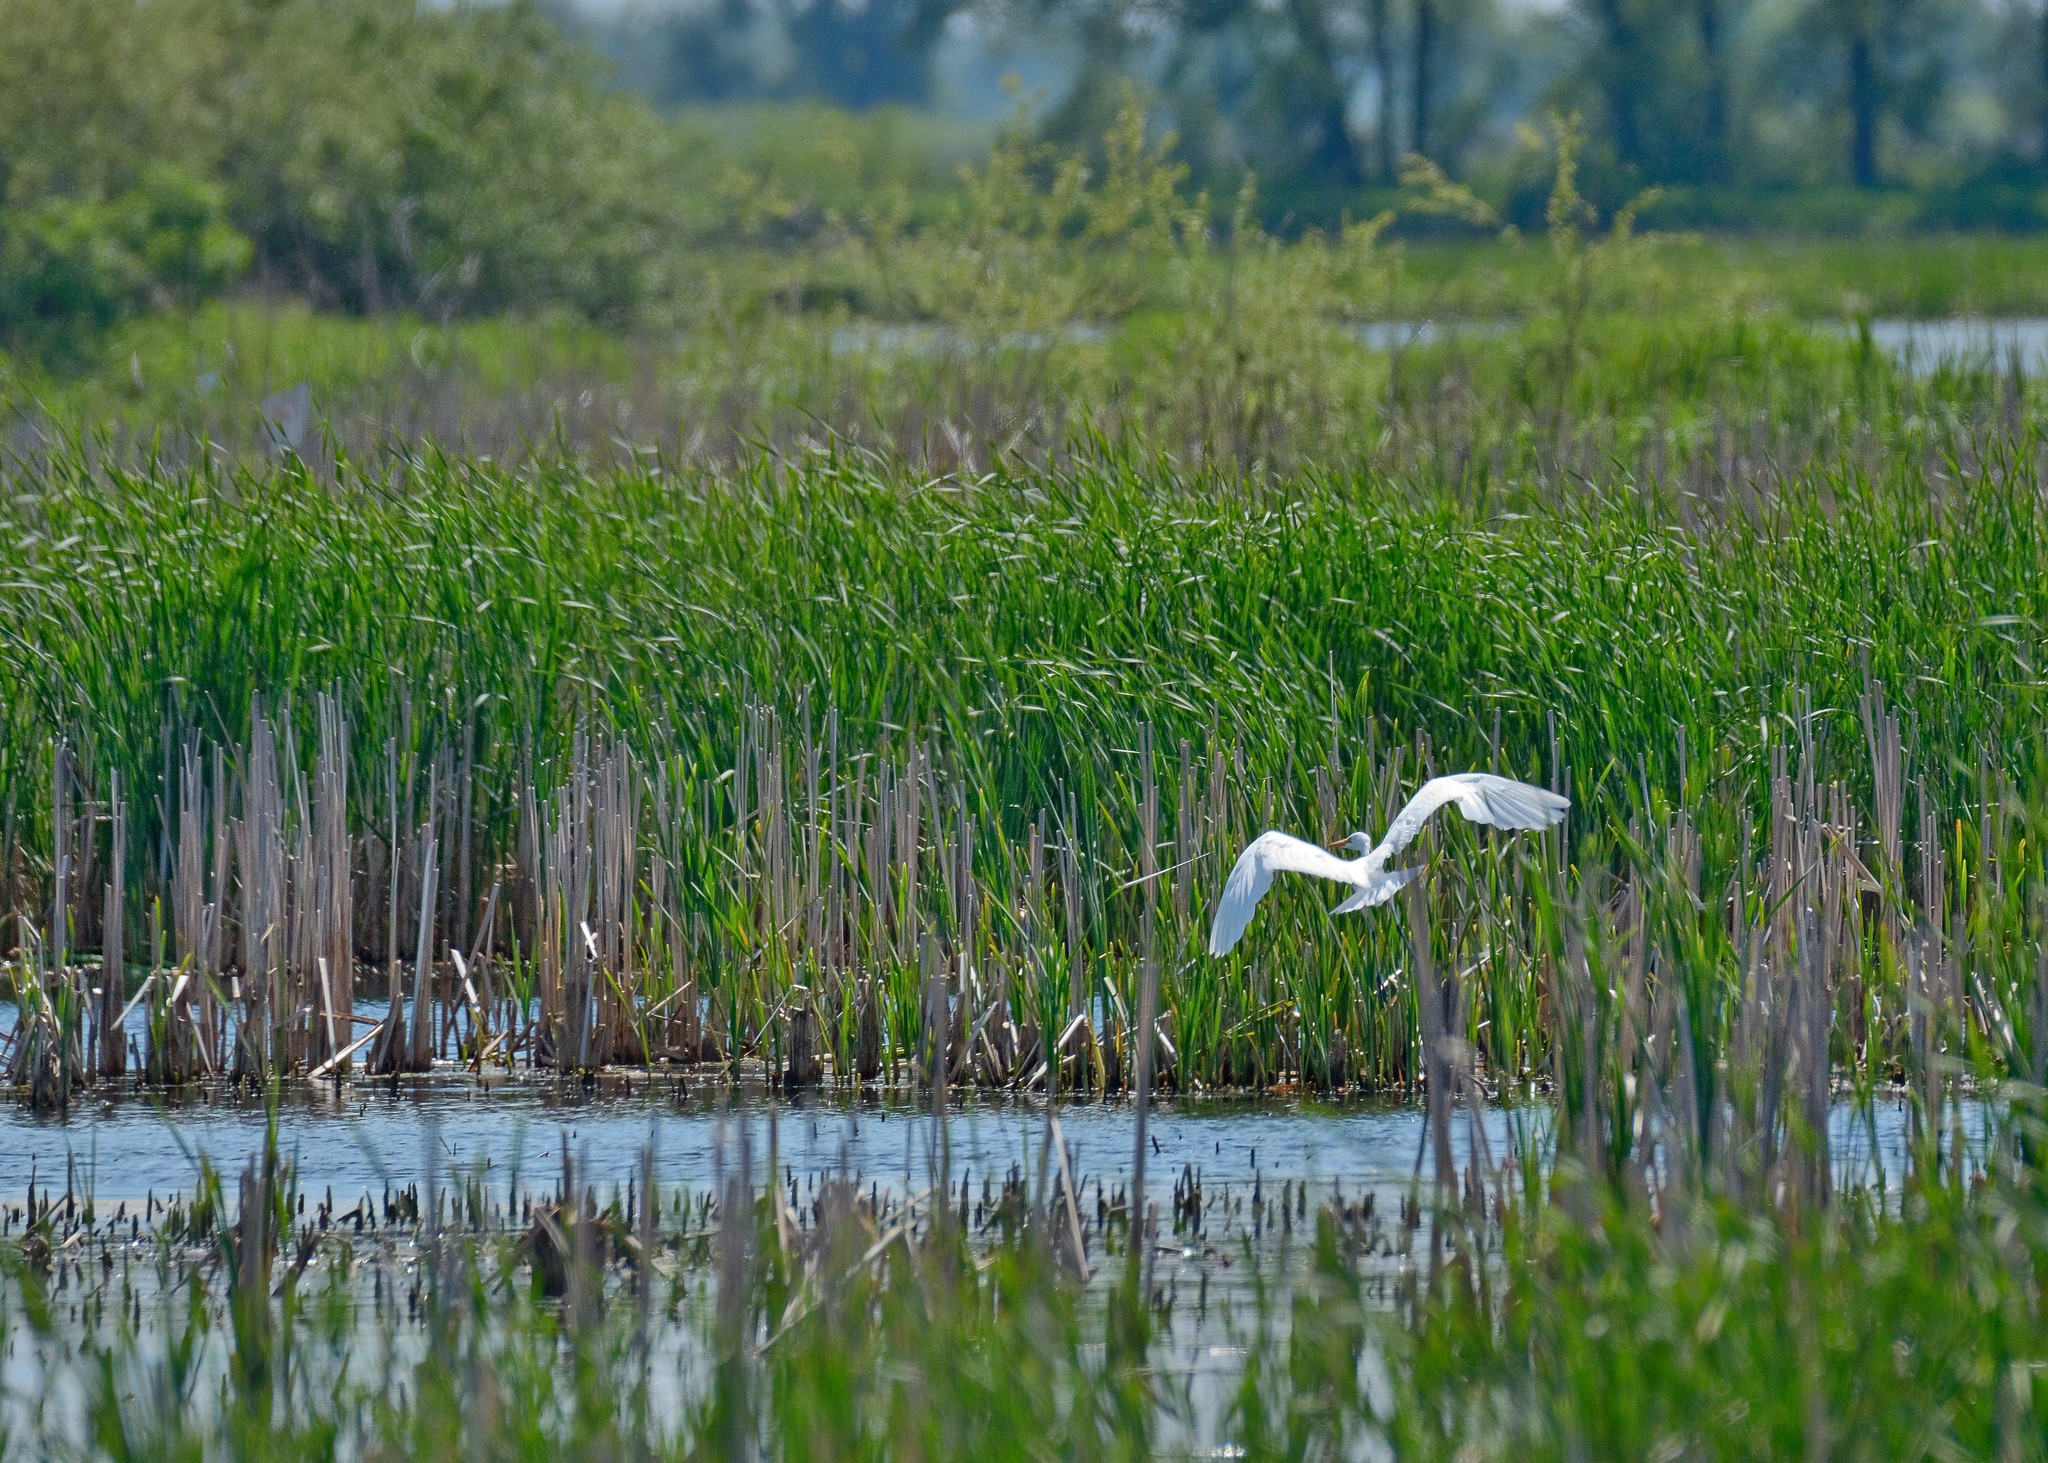 Wetlands in Wisconsin may fare better than other states after Supreme Court limited federal regulation